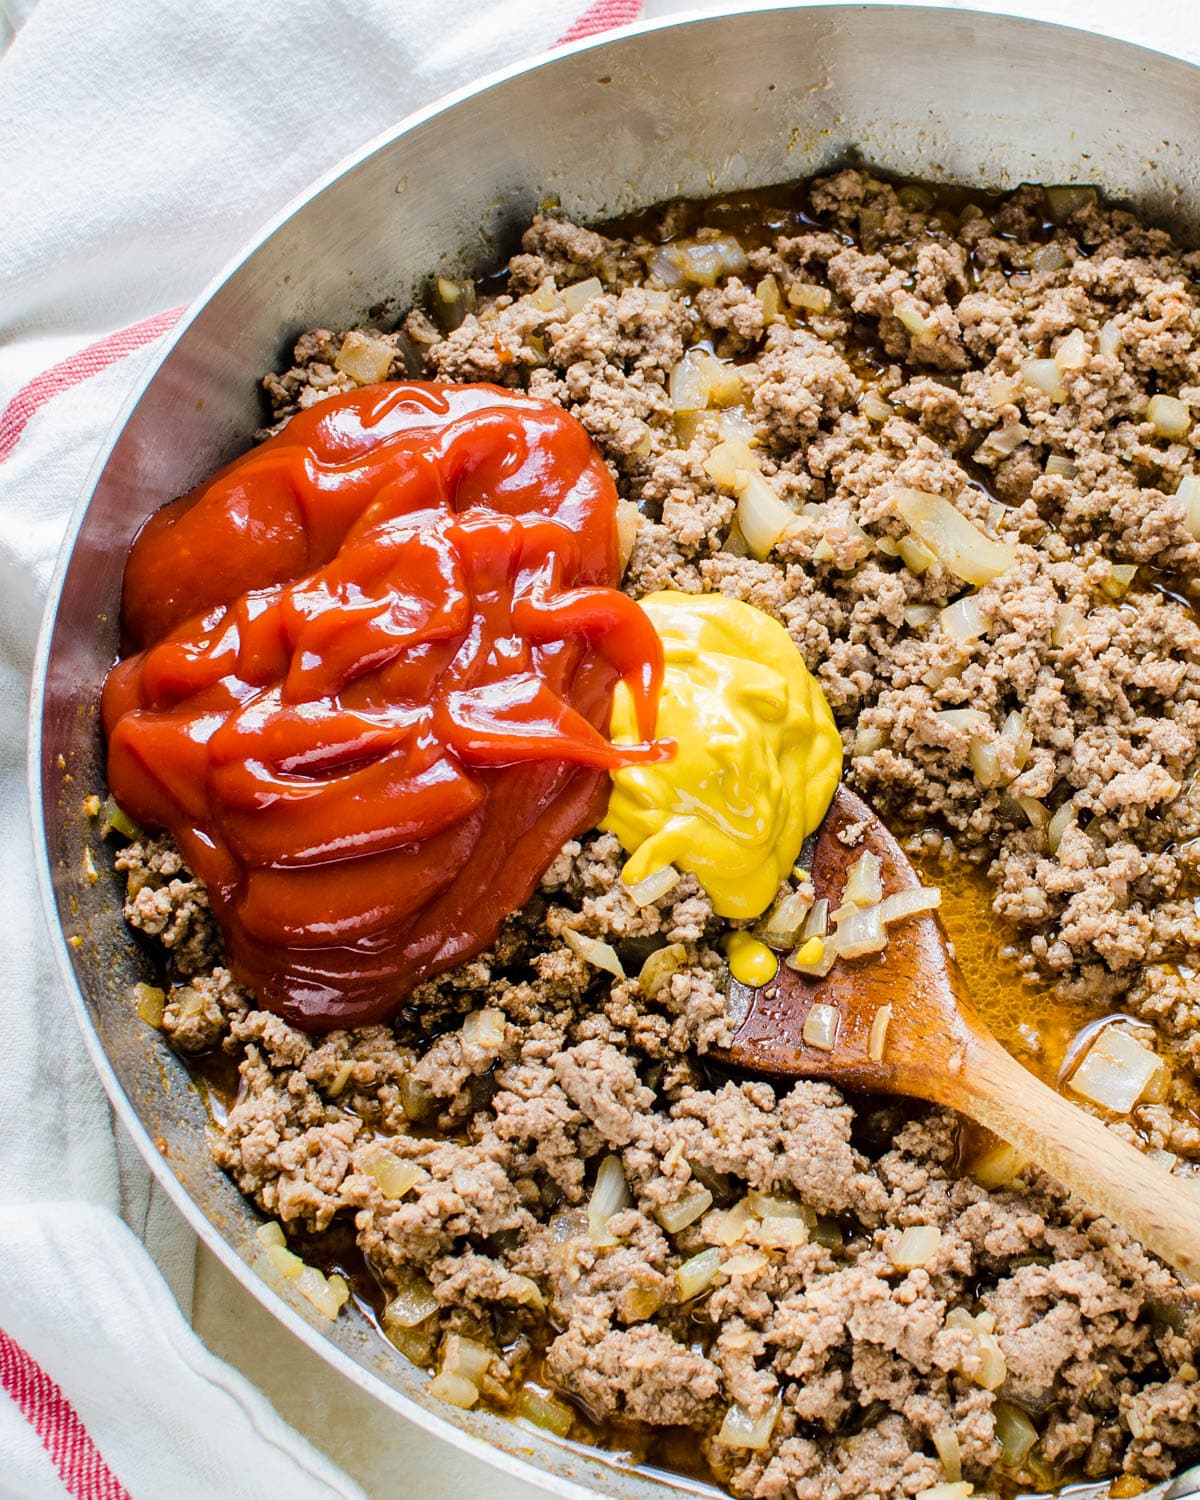 Adding ketchup and mustard to the ground beef mixture.